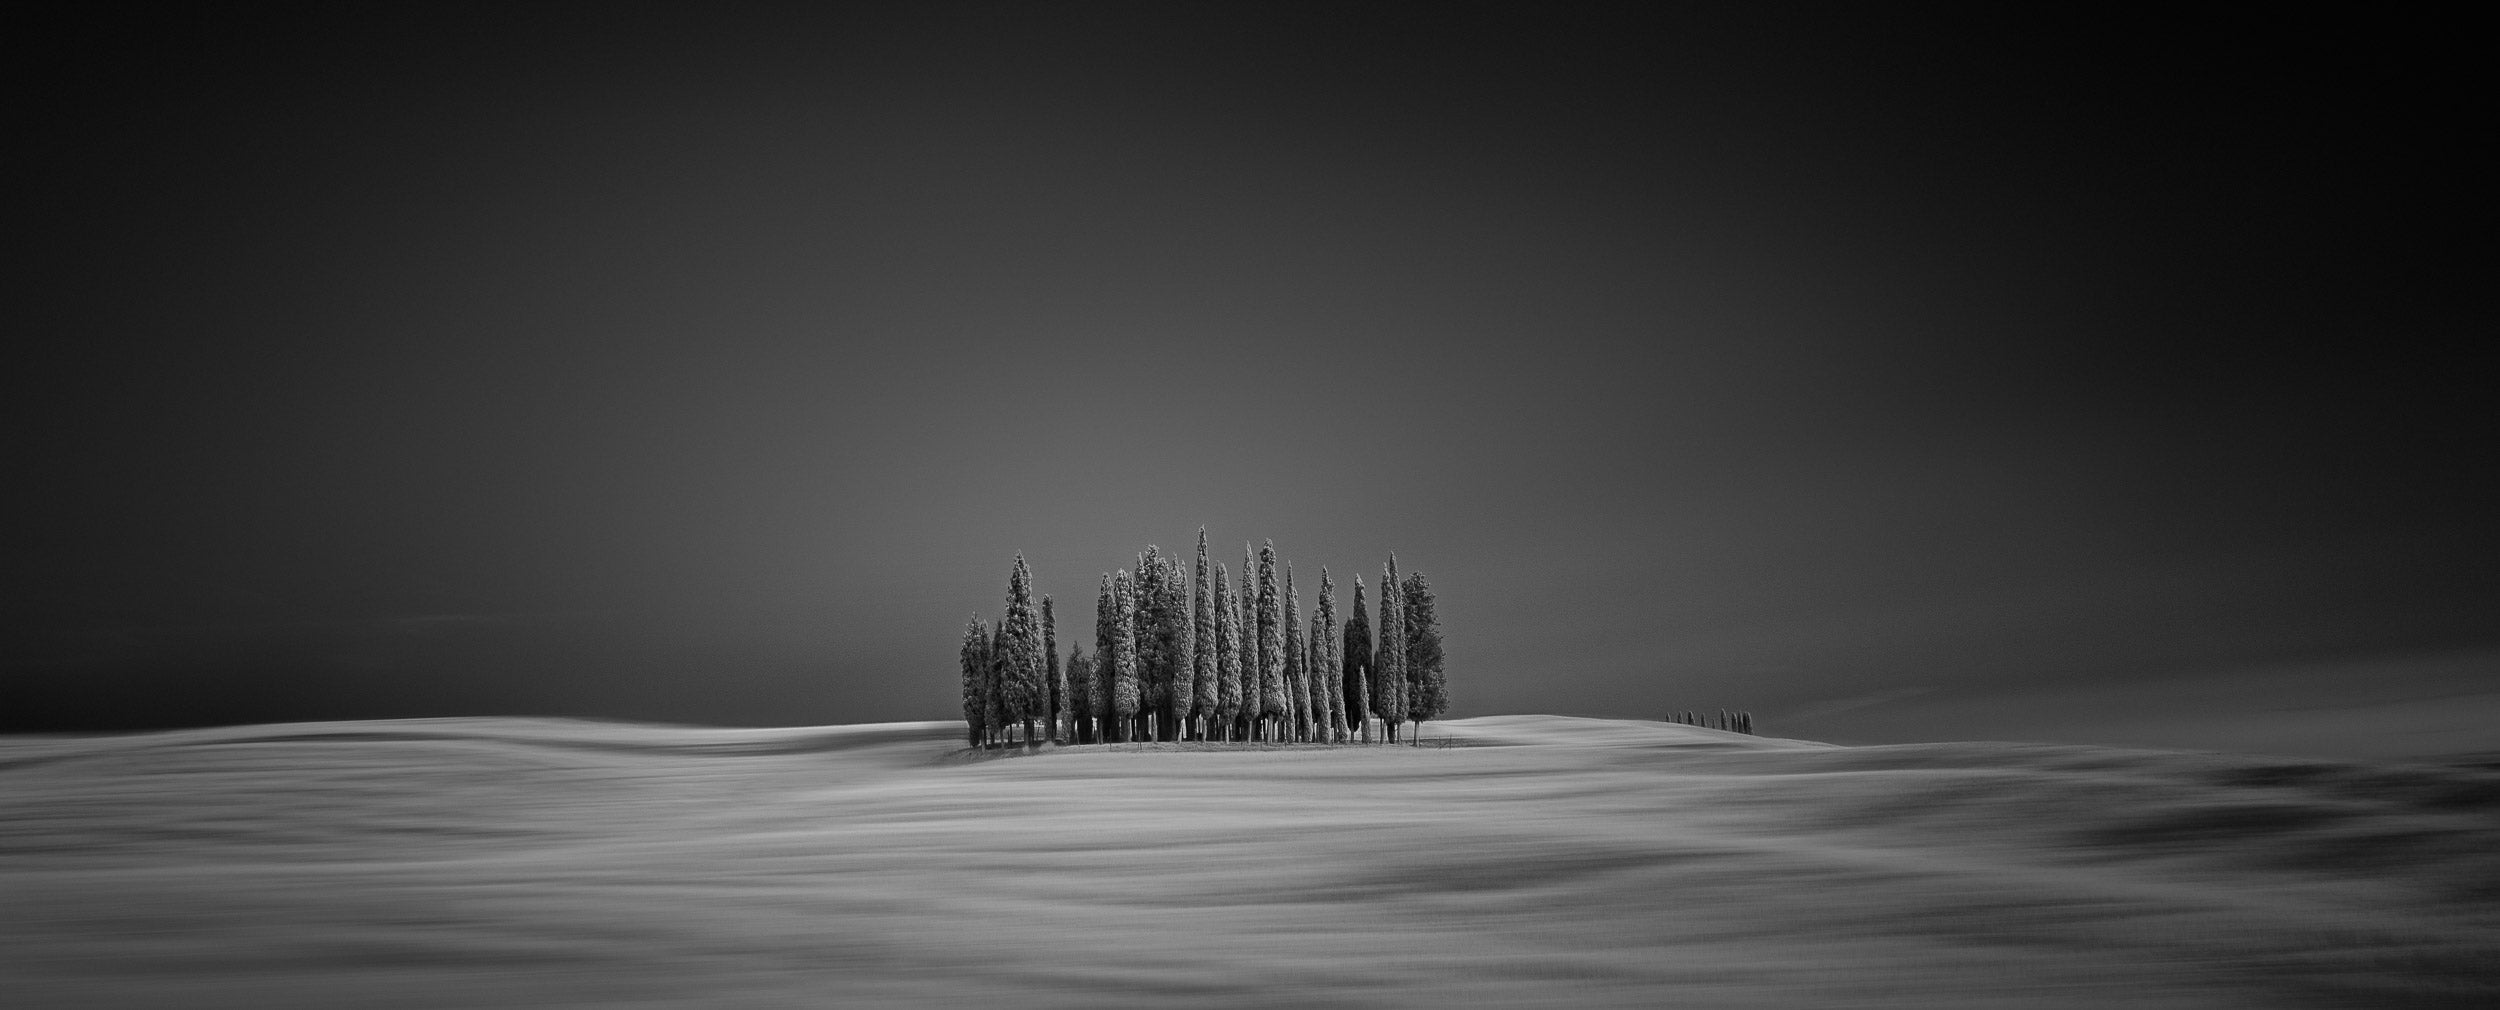 Black and white photograph of a group of cypress trees in San Quirico d’Orcia, Italy, with smooth snowdrifts creating a flowing effect around them.